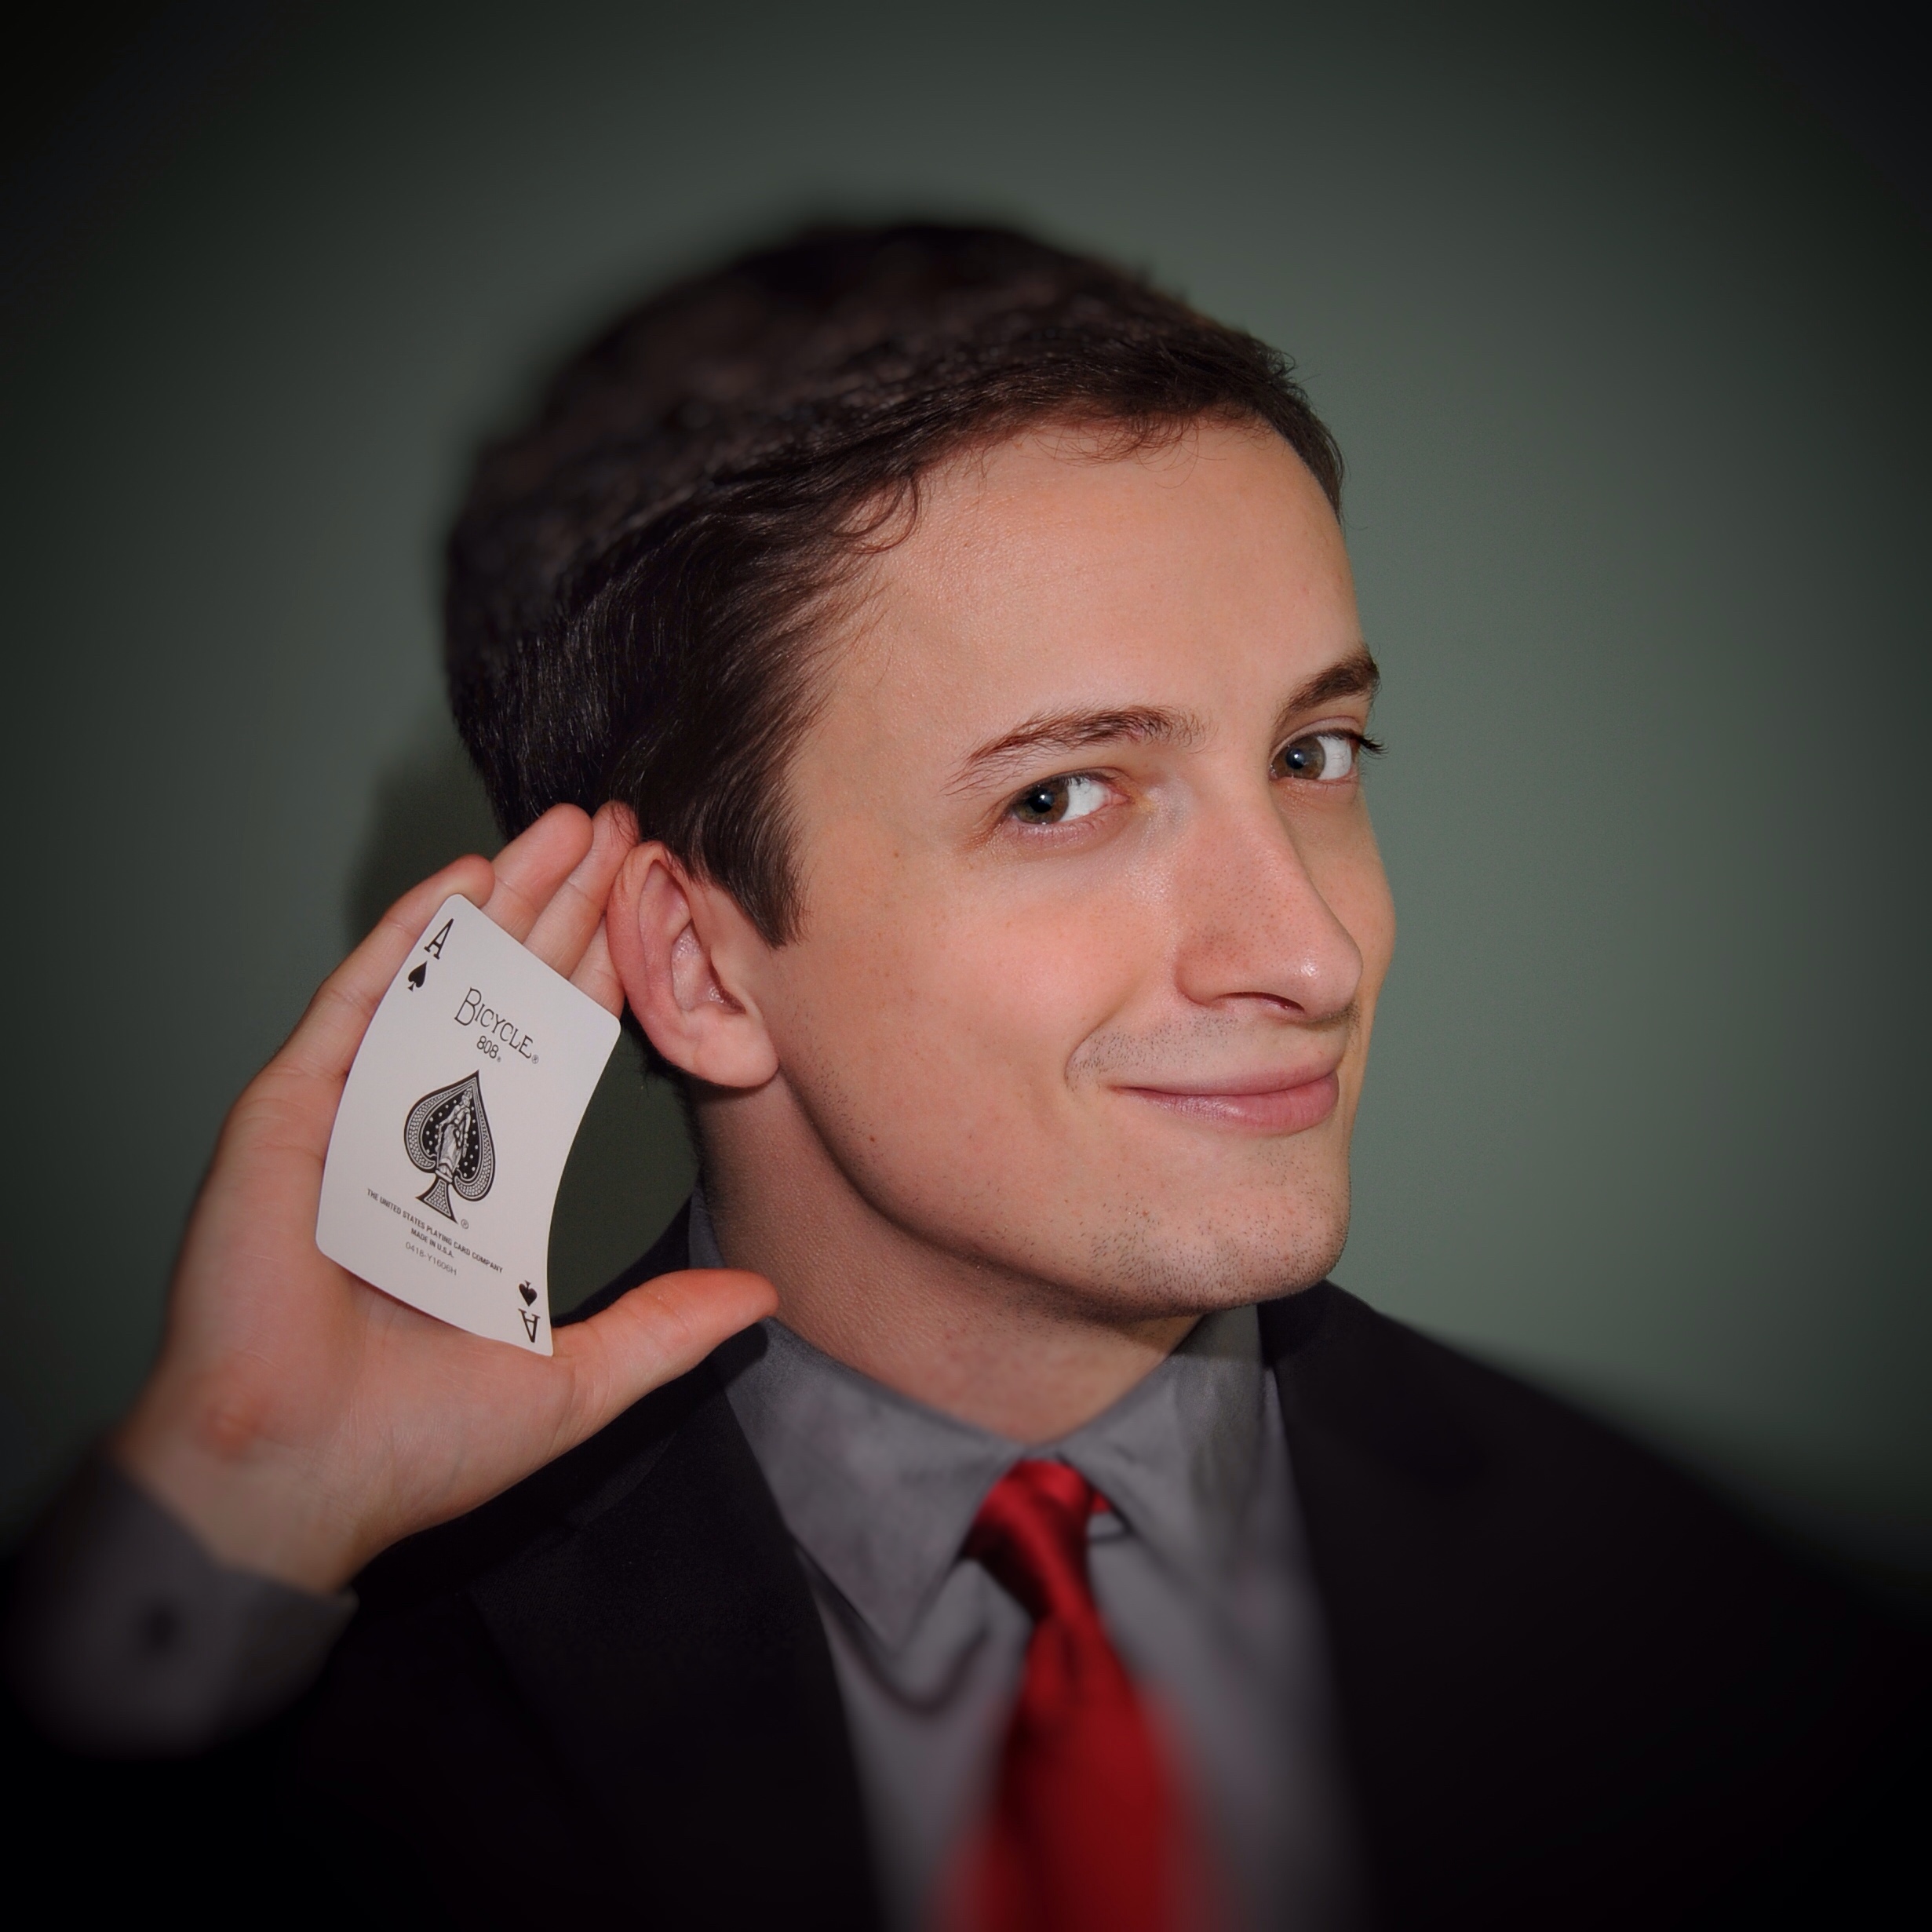 Daniel Roy is a young white man with slicked brown hair. He smirks playfully and puts his hand behind his ear with a card face up in his palm.